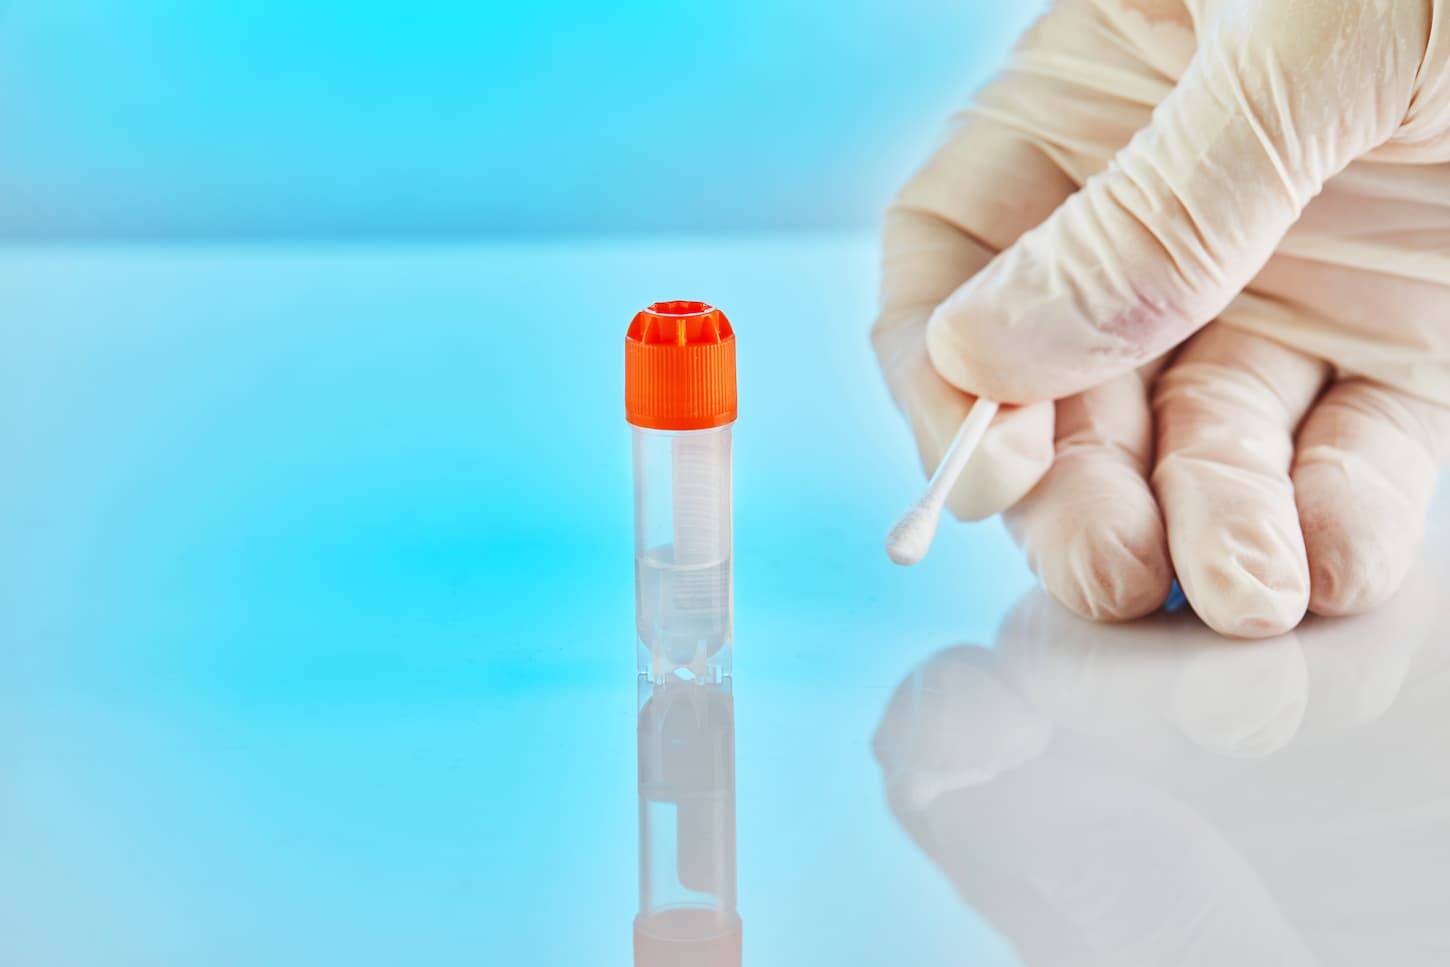 An image of a tube with liquid for DNA analysis and a gloved hand holding a stick on a blue background with reflection.